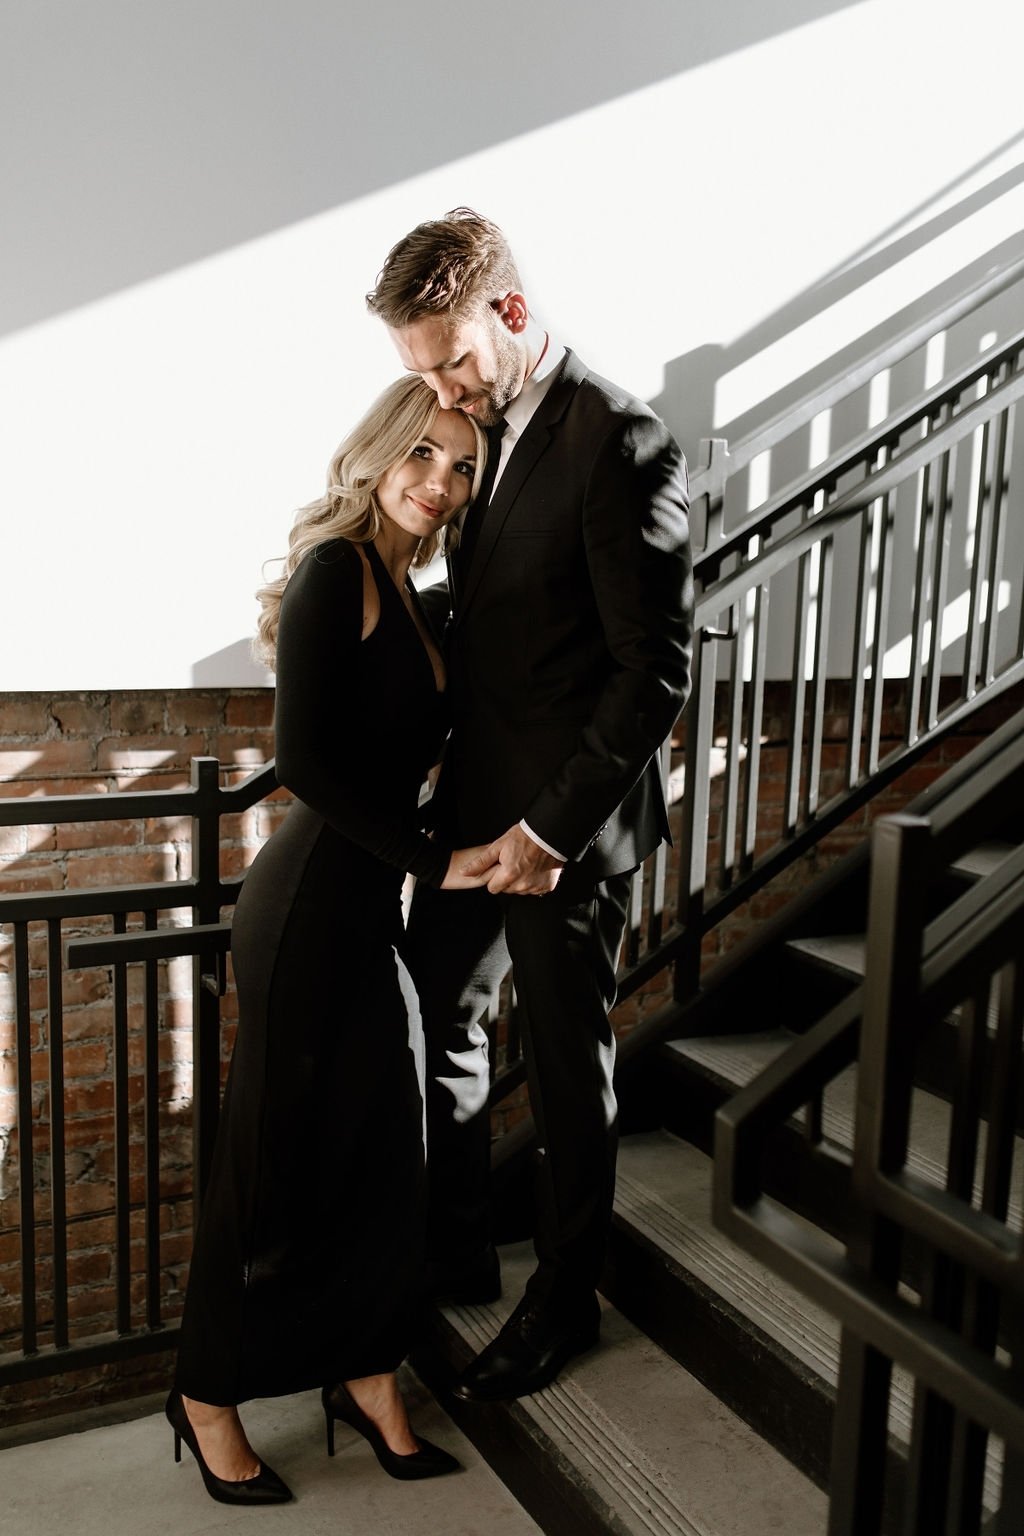 Our stairwells let in so much natural light, and are a great spot for photos!
The stairwells have been renovated, giving an industrial feel, but you still get a sense of the historic building with the brick walls. 
.
. #yegweddingvenue #yegwedding #w